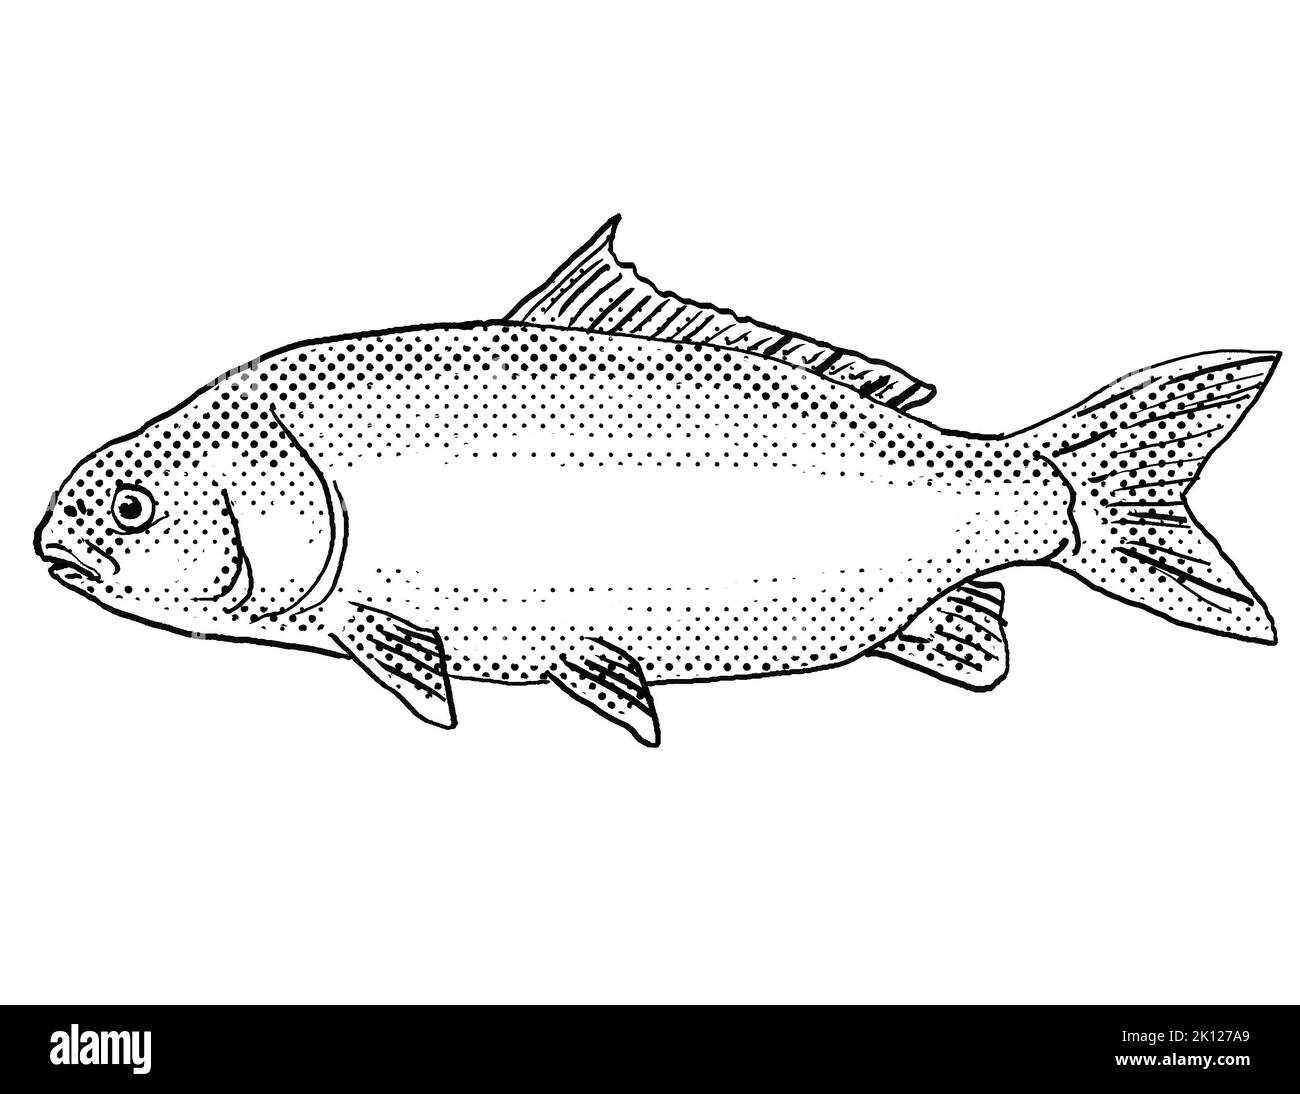 Cartoon style drawing of a black buffalo or Ictiobus niger  freshwater fish found in North America with halftone dots on isolated background in black Stock Photo